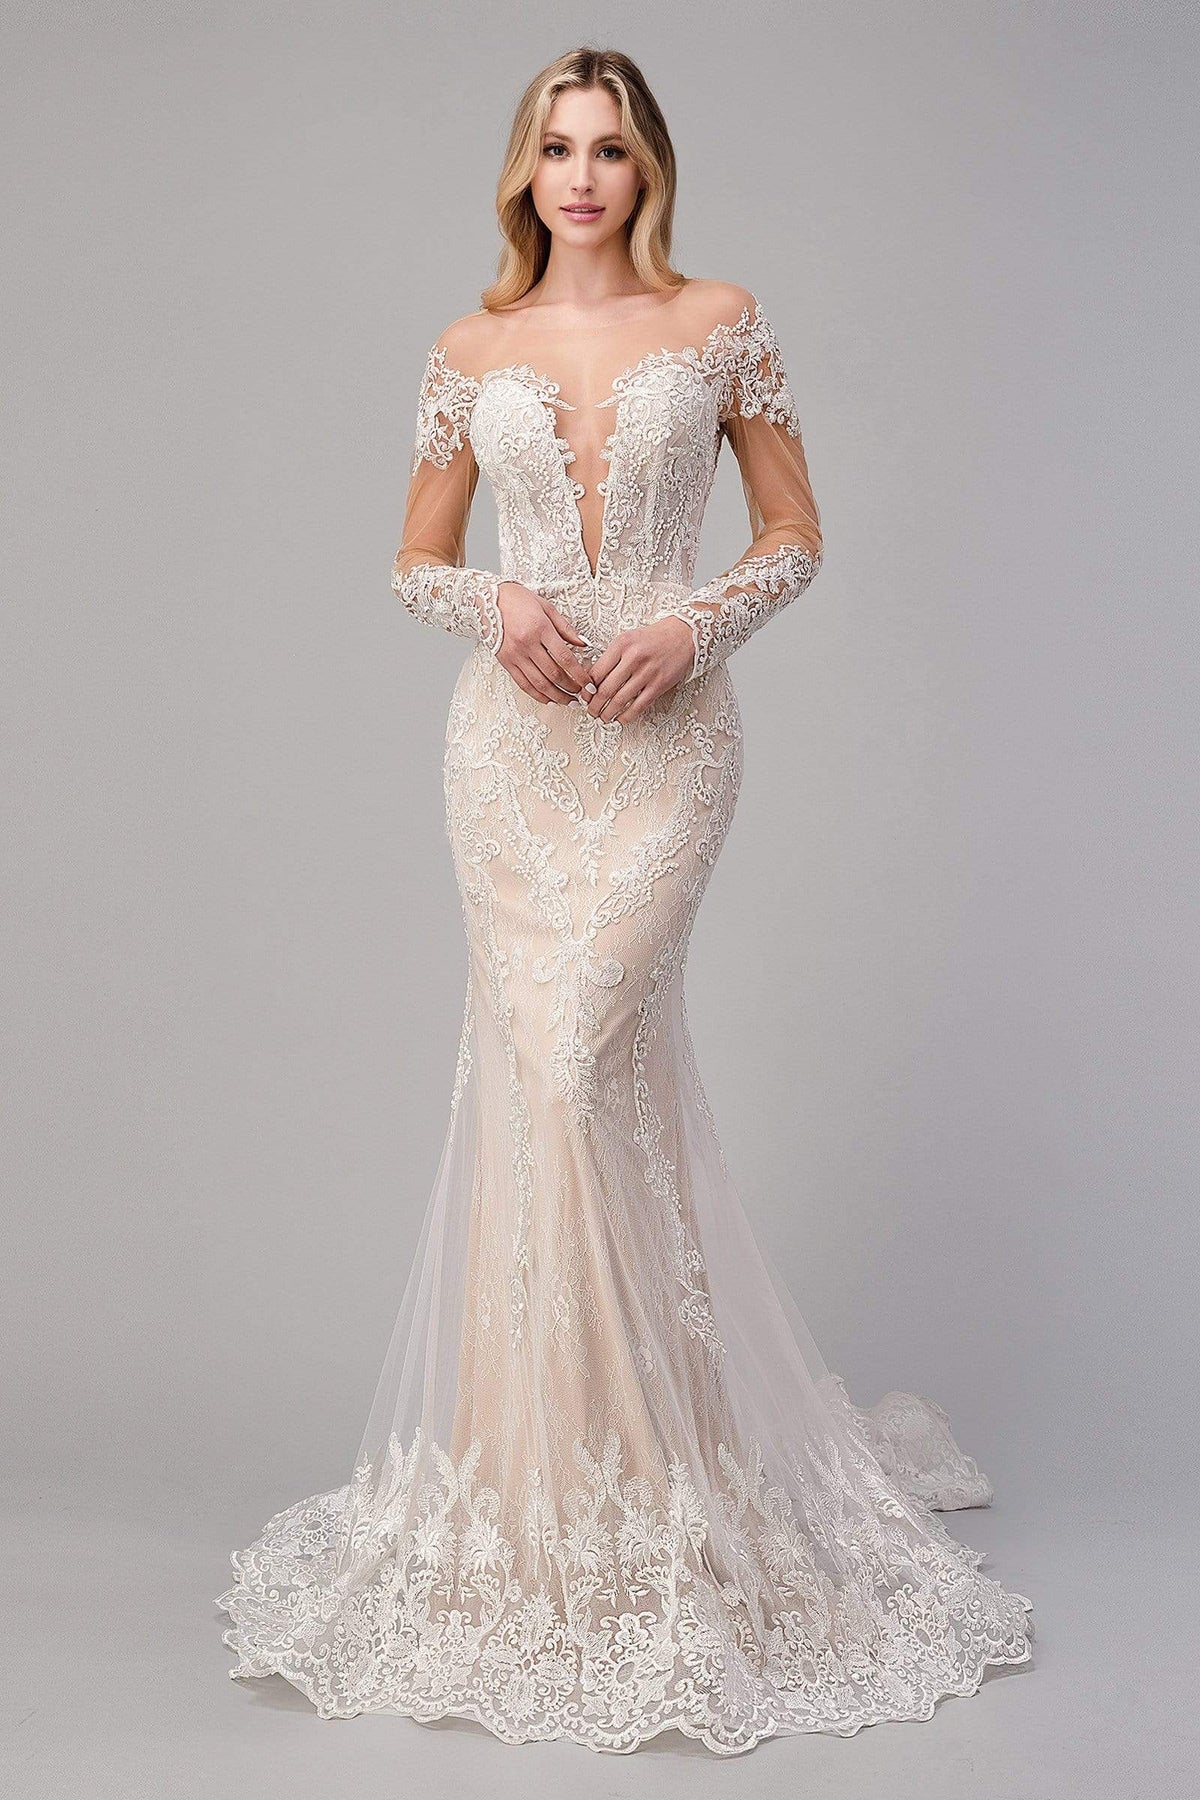 Andrea and Leo - A1022 Embroidered Lace Sheer Bridal Dress Wedding Dresses 2 / Off White